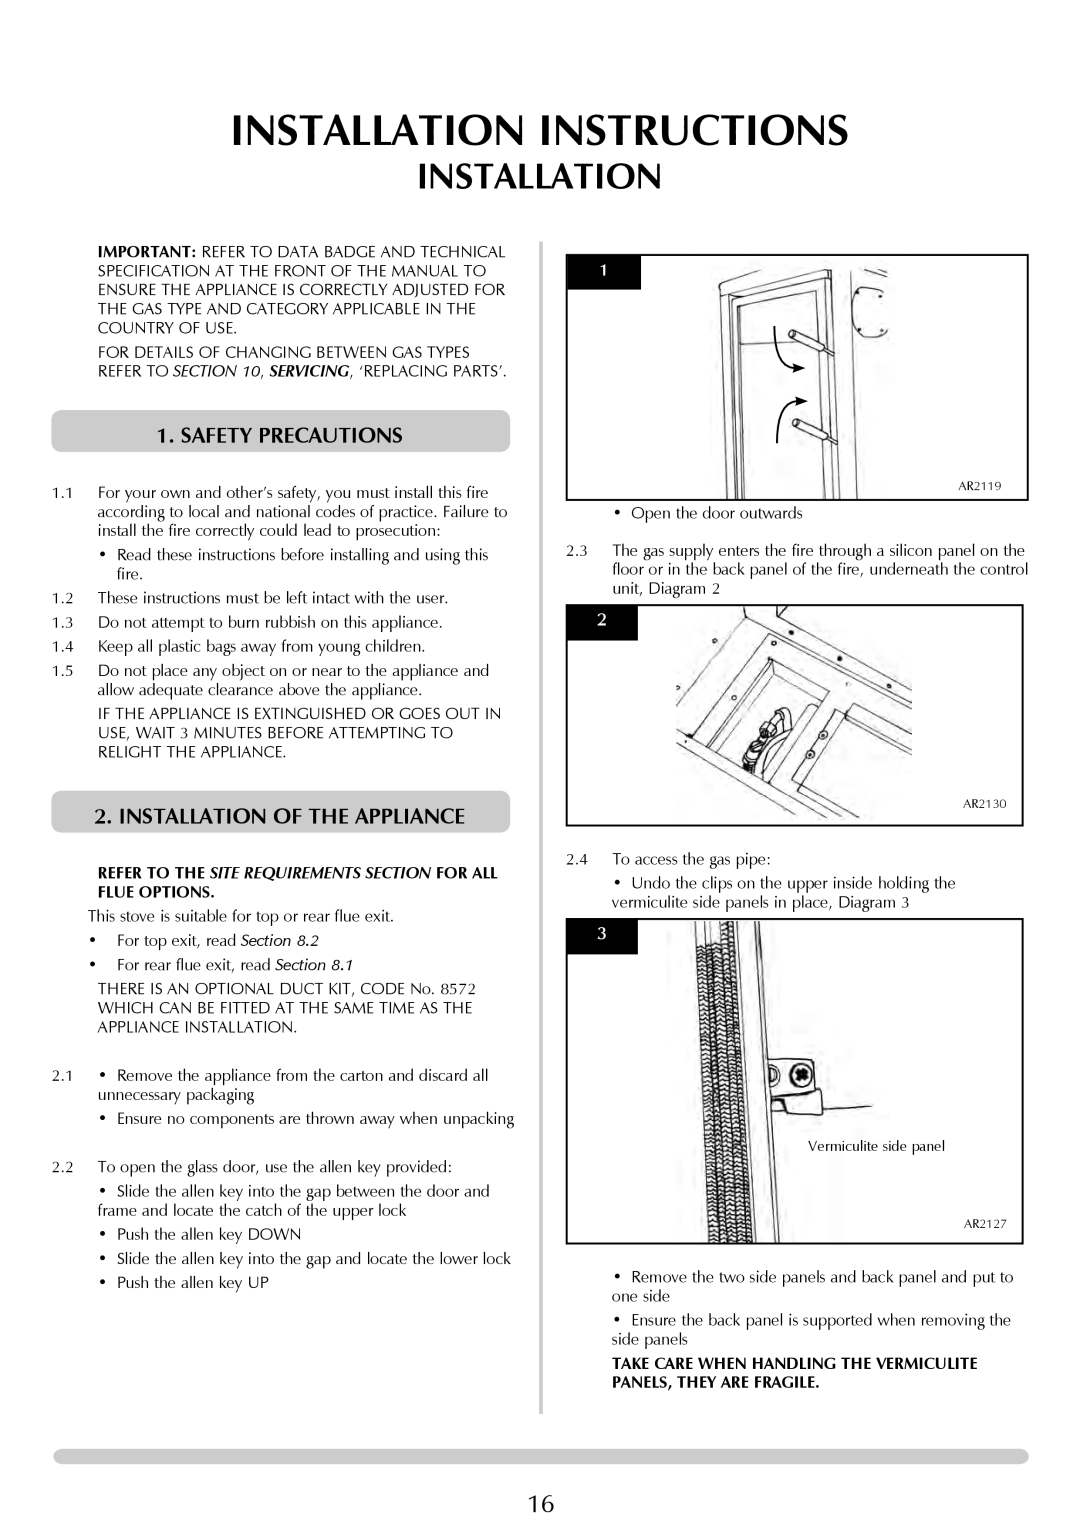 Stovax Studio 22 manual Safety Precautions, installation of the appliance, Installation Instructions 